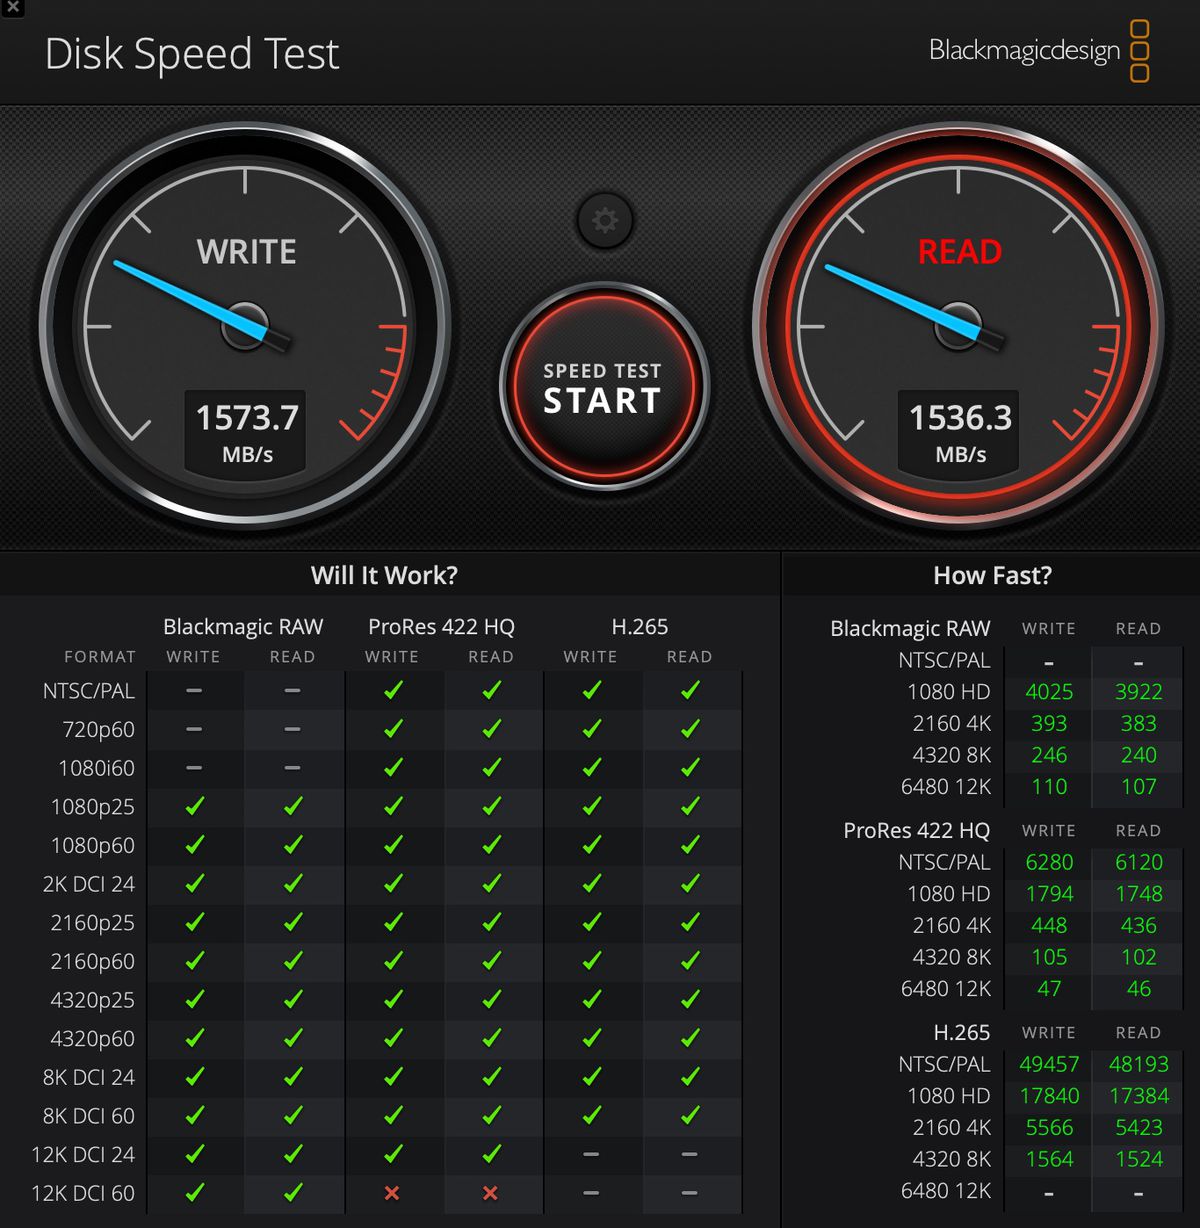 A screenshot from the Blackmagic Disk Speed ​​Test showing scores of 1537.7 for writes and 1536.3 for reads.